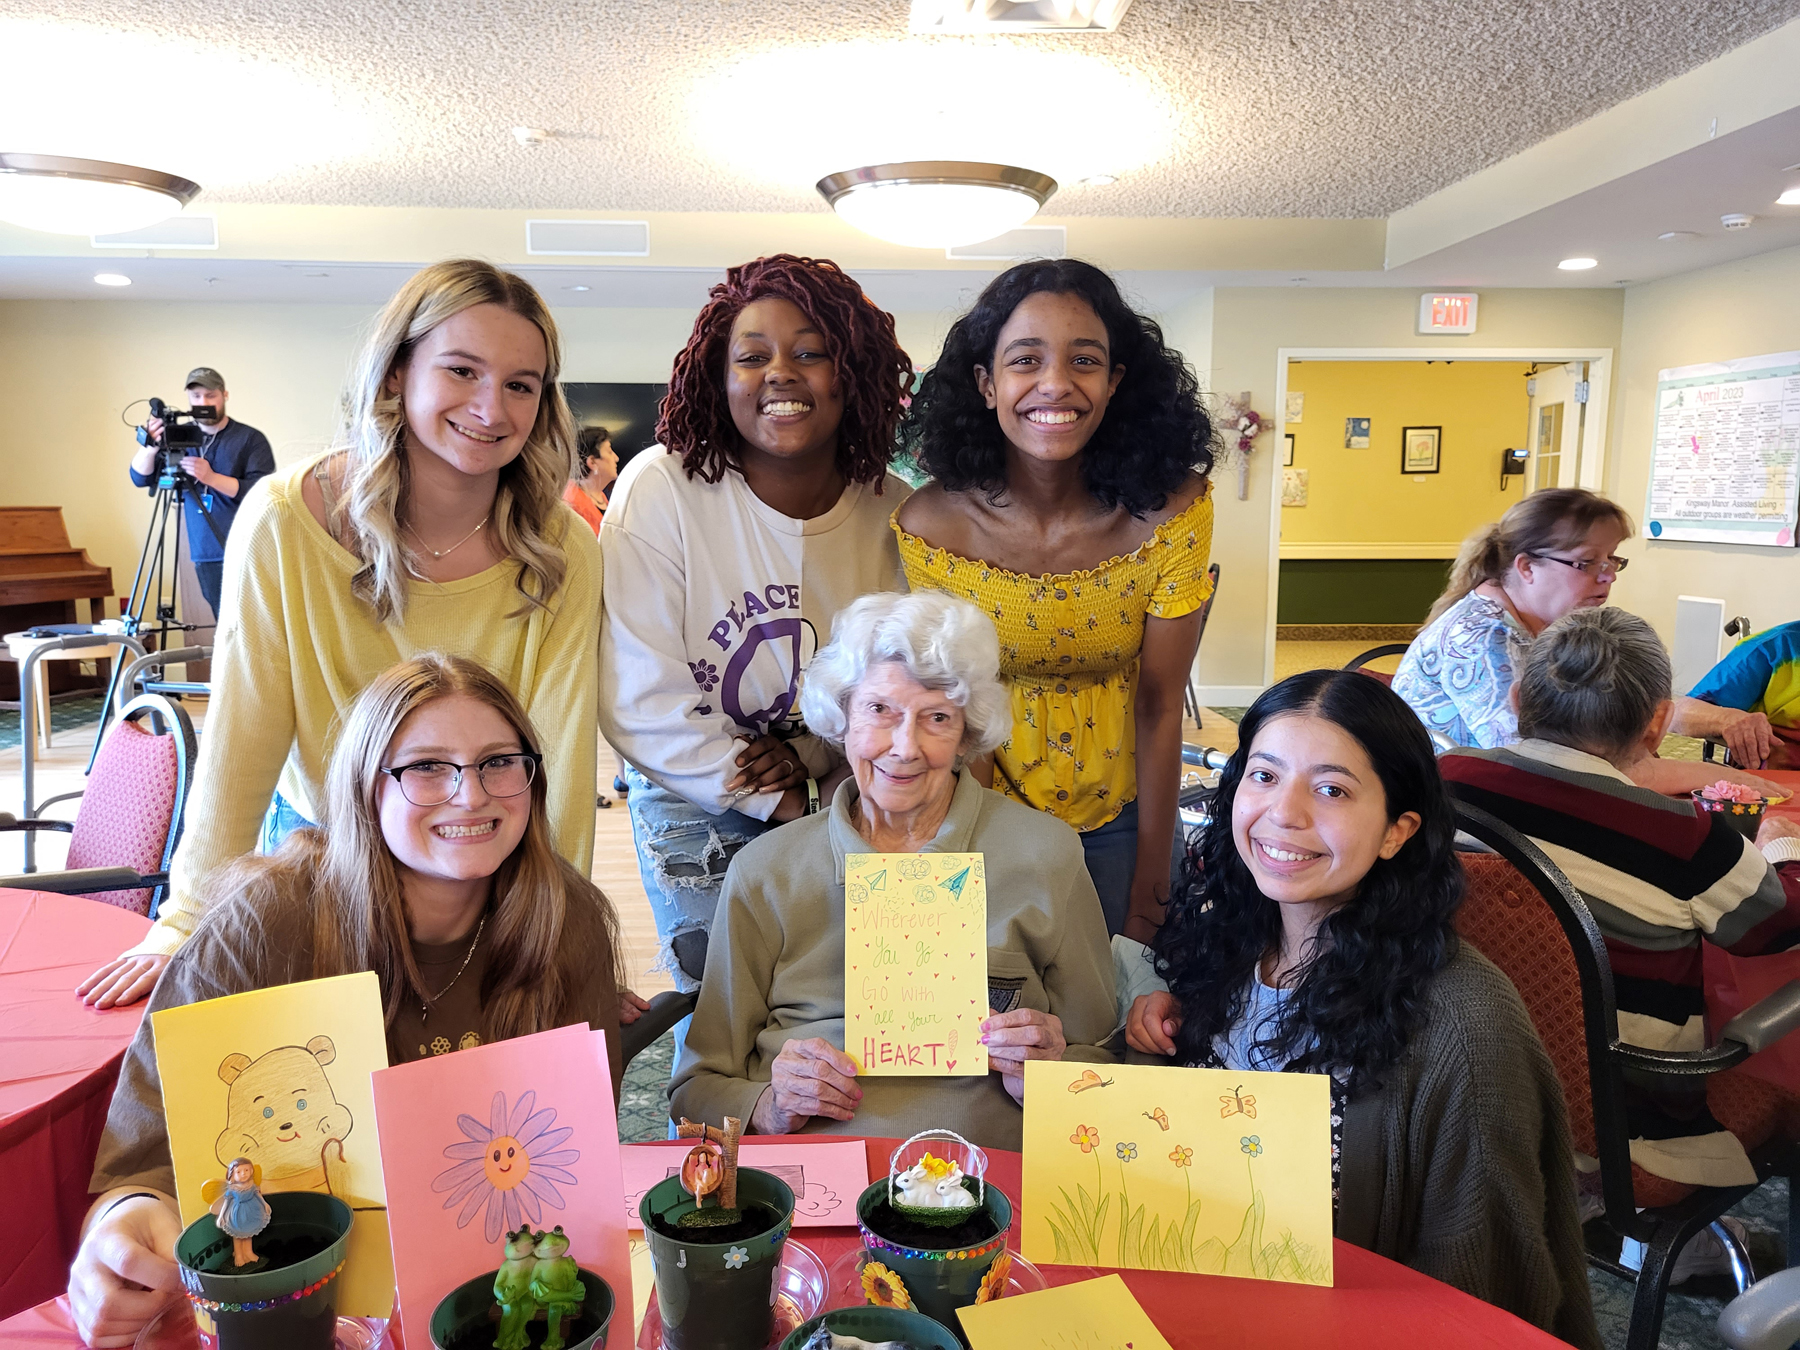 Students holding cards and flower pots with resident, seated at table